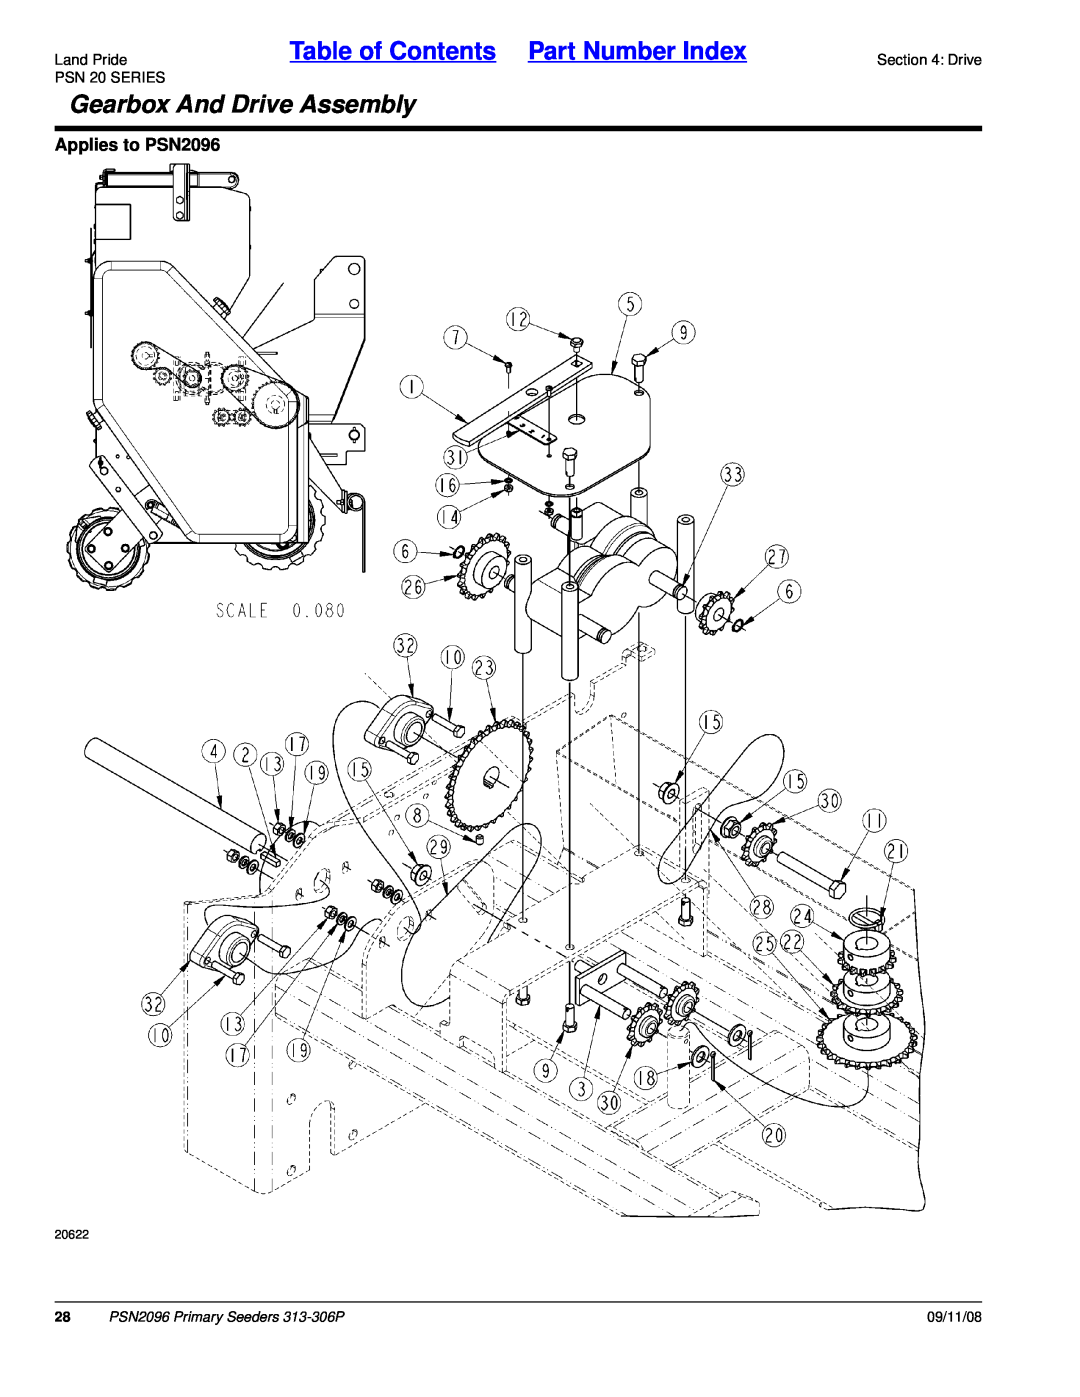 Land Pride 20583 Gearbox And Drive Assembly, Land PrideTable of Contents Part Number Index, Applies to PSN2096, 09/11/08 